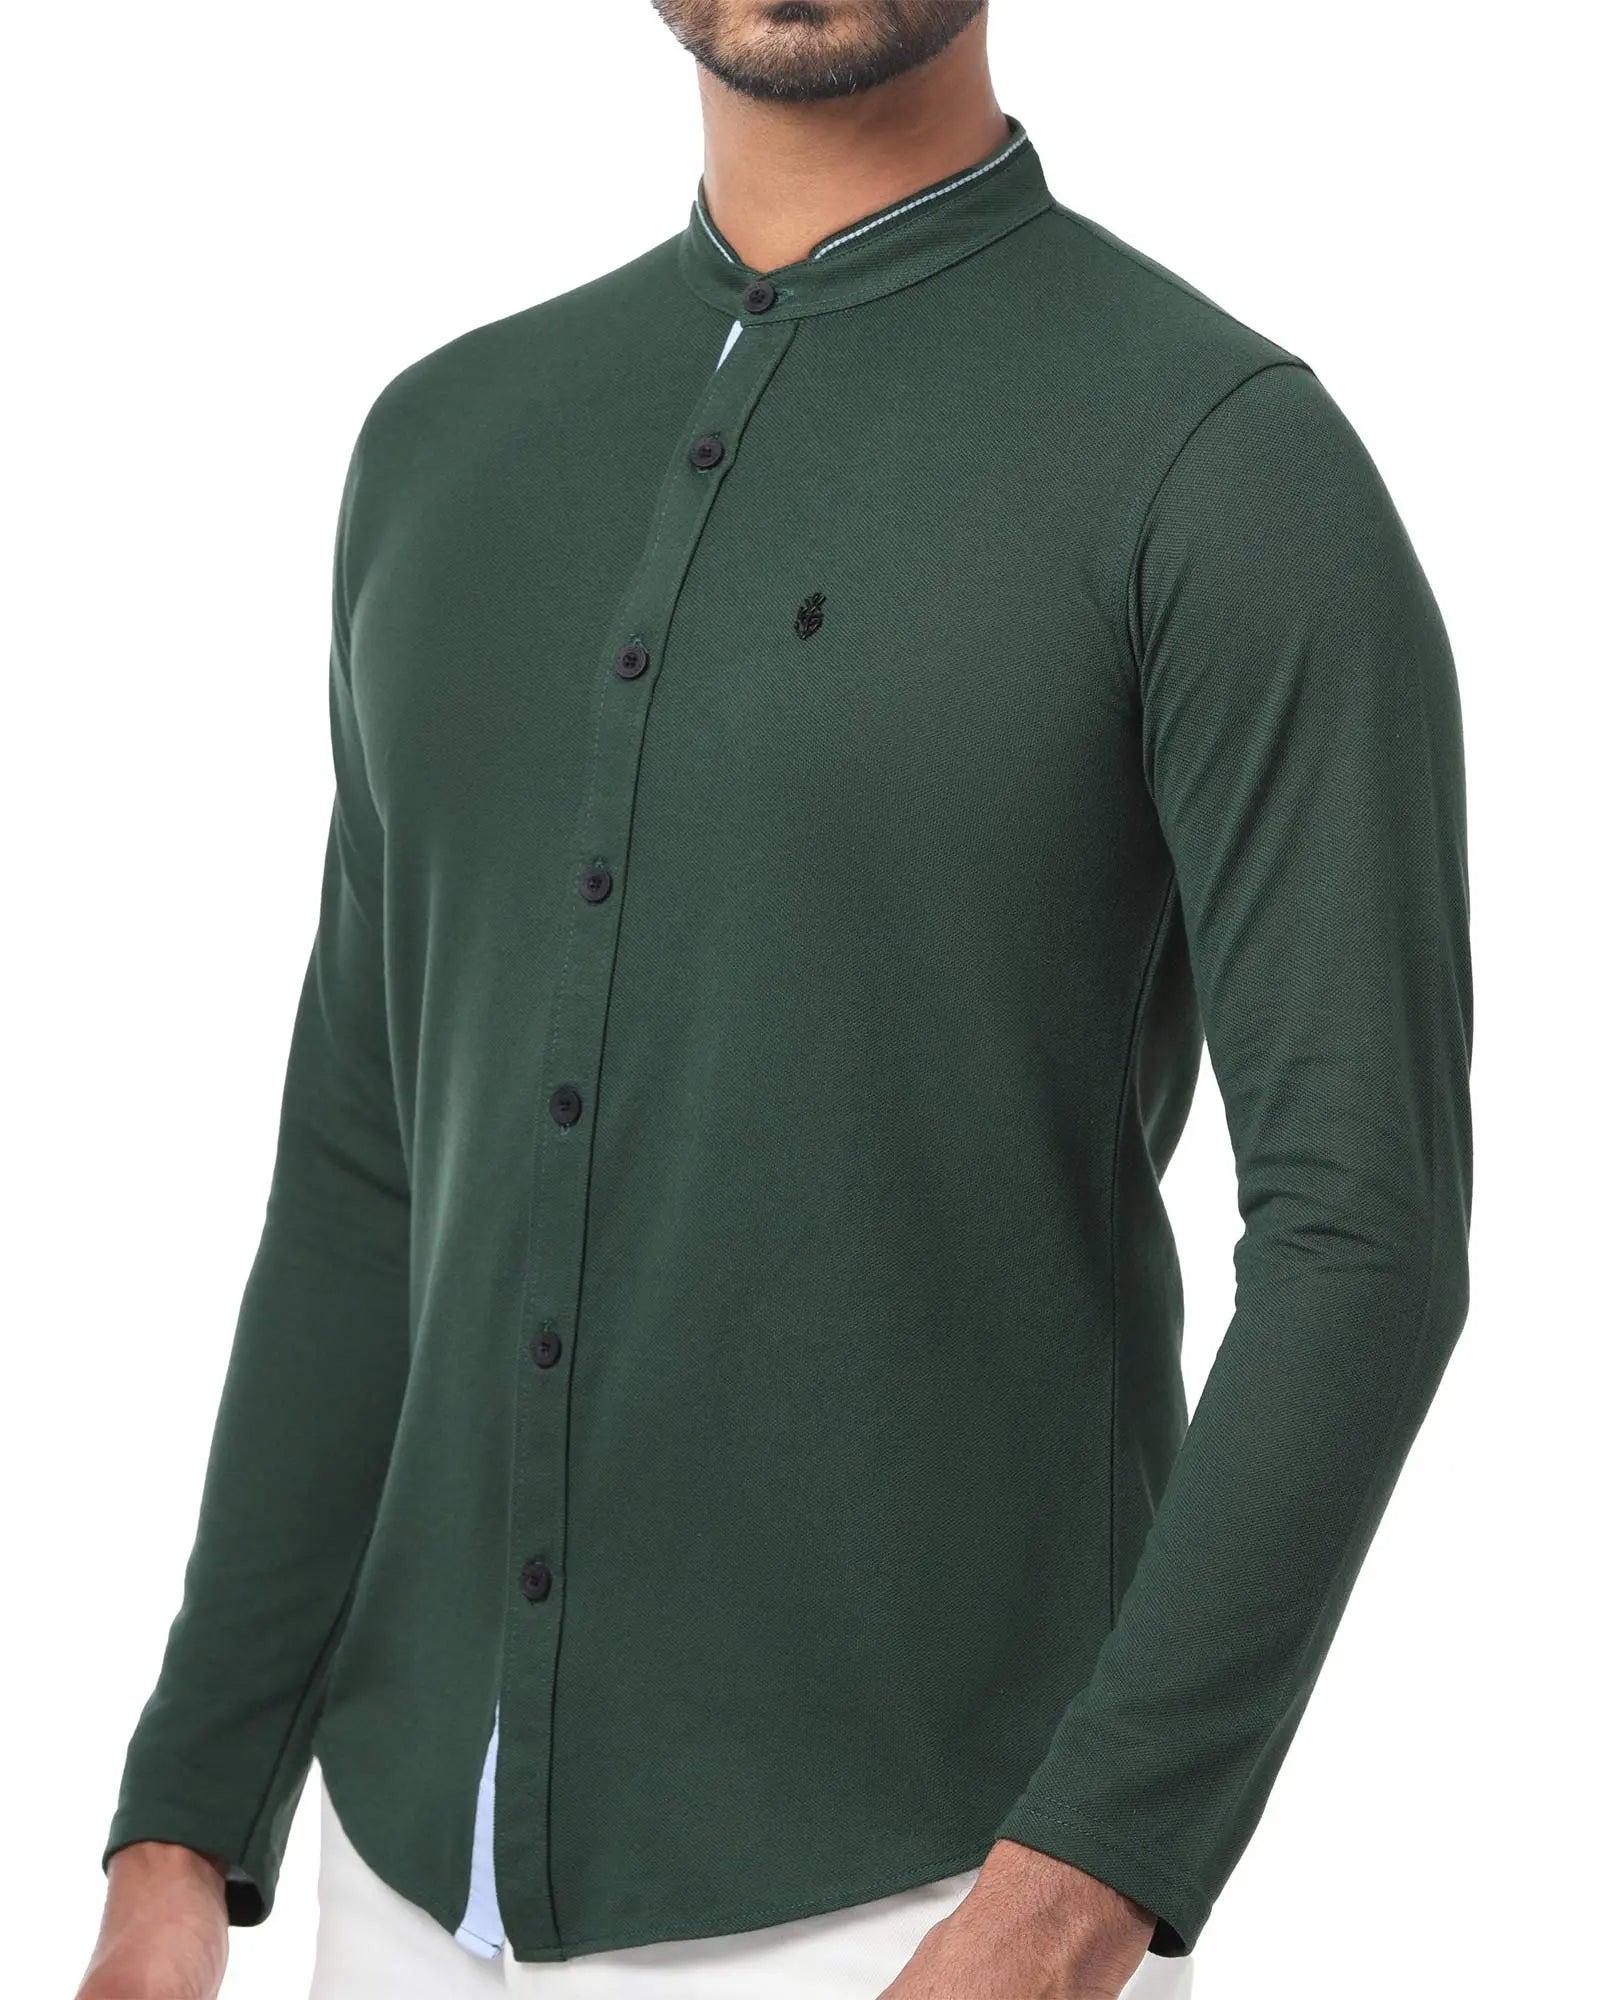 LCY London | Capsule Collection - Men&#39;s Hybrid Long Sleeved Shirt | Full Buttoned LCY London